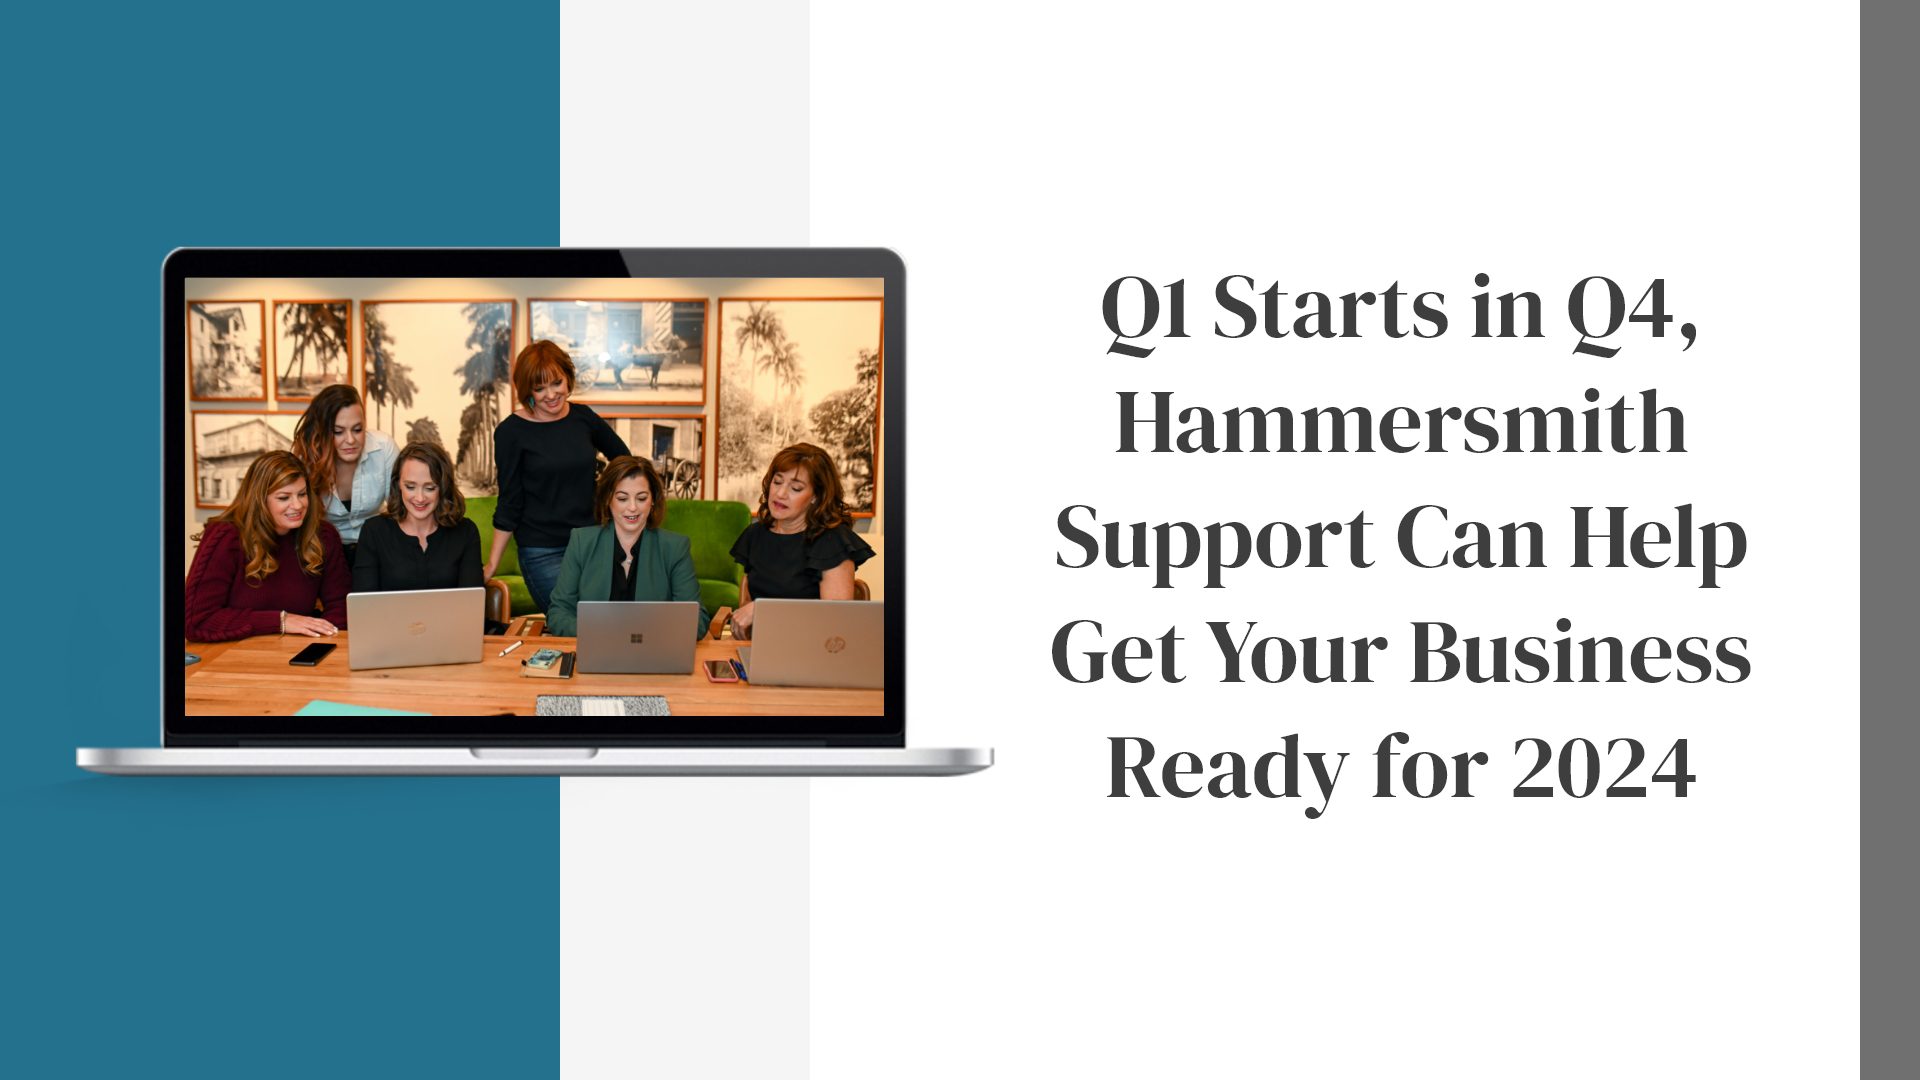 Q1 Starts in Q4, Hammersmith Support Can Help Get Your Business Ready for 2024